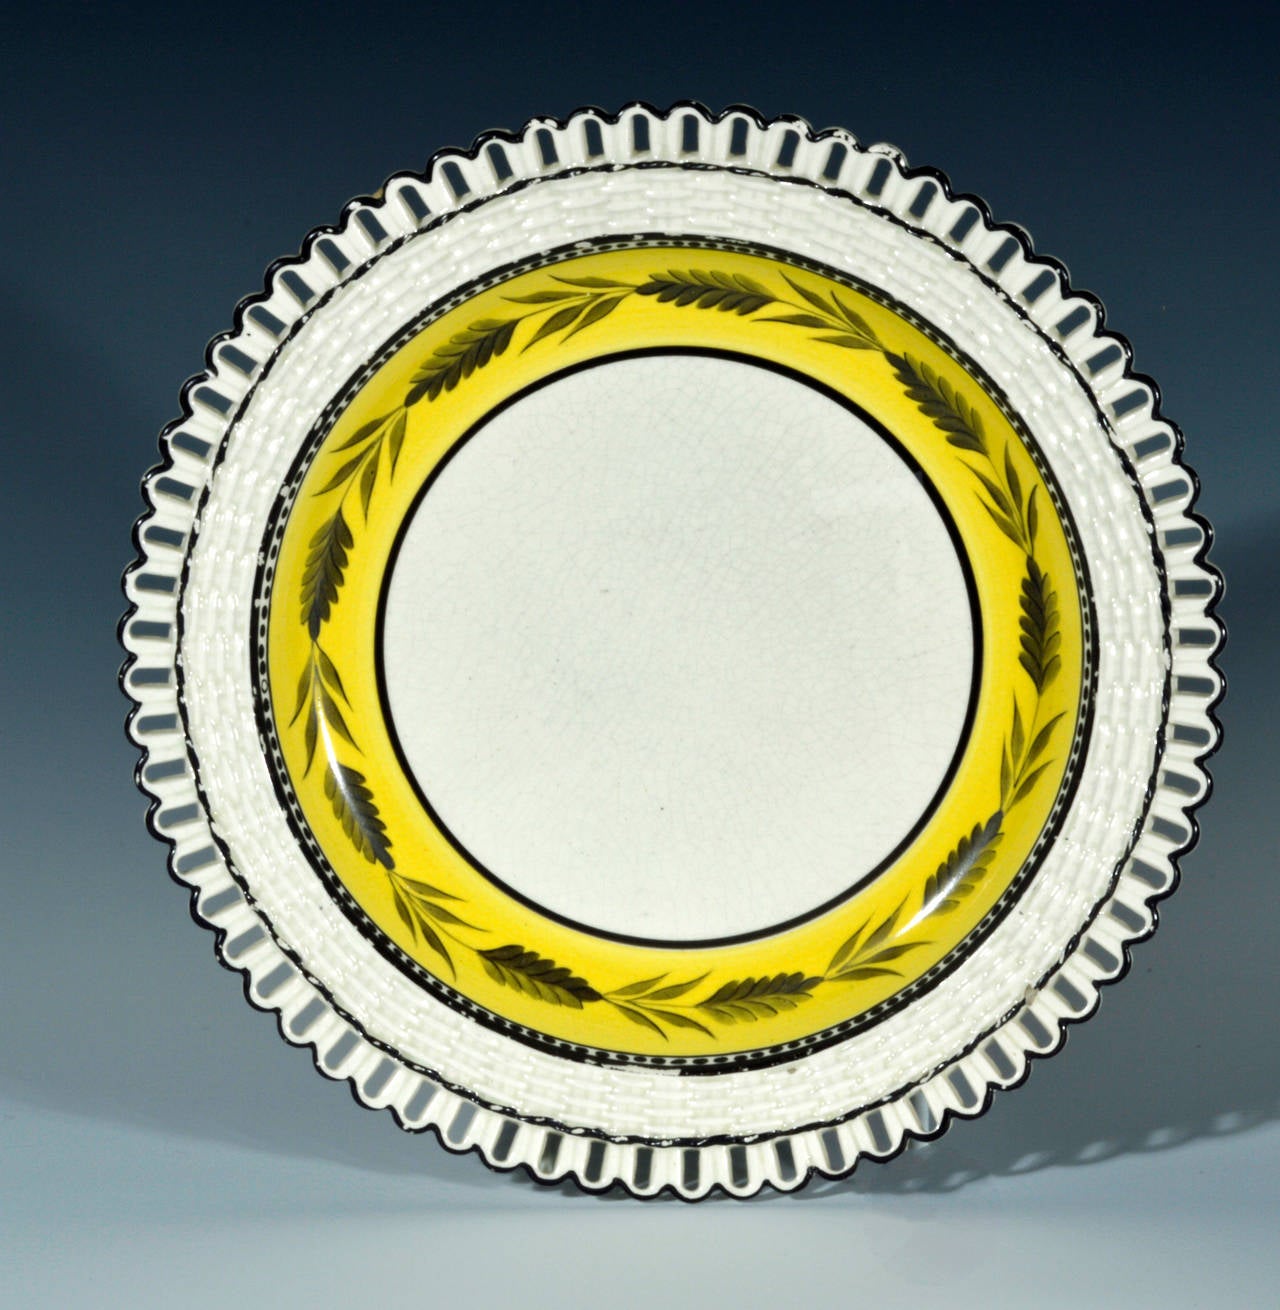 The Liverpool creamware openwork dishes were made at the Herculaneum factory. The charming dishes have an outer band of openwork attached to a basketweave border. 

The outer section of the central well has a wide band of yellow ground with a band